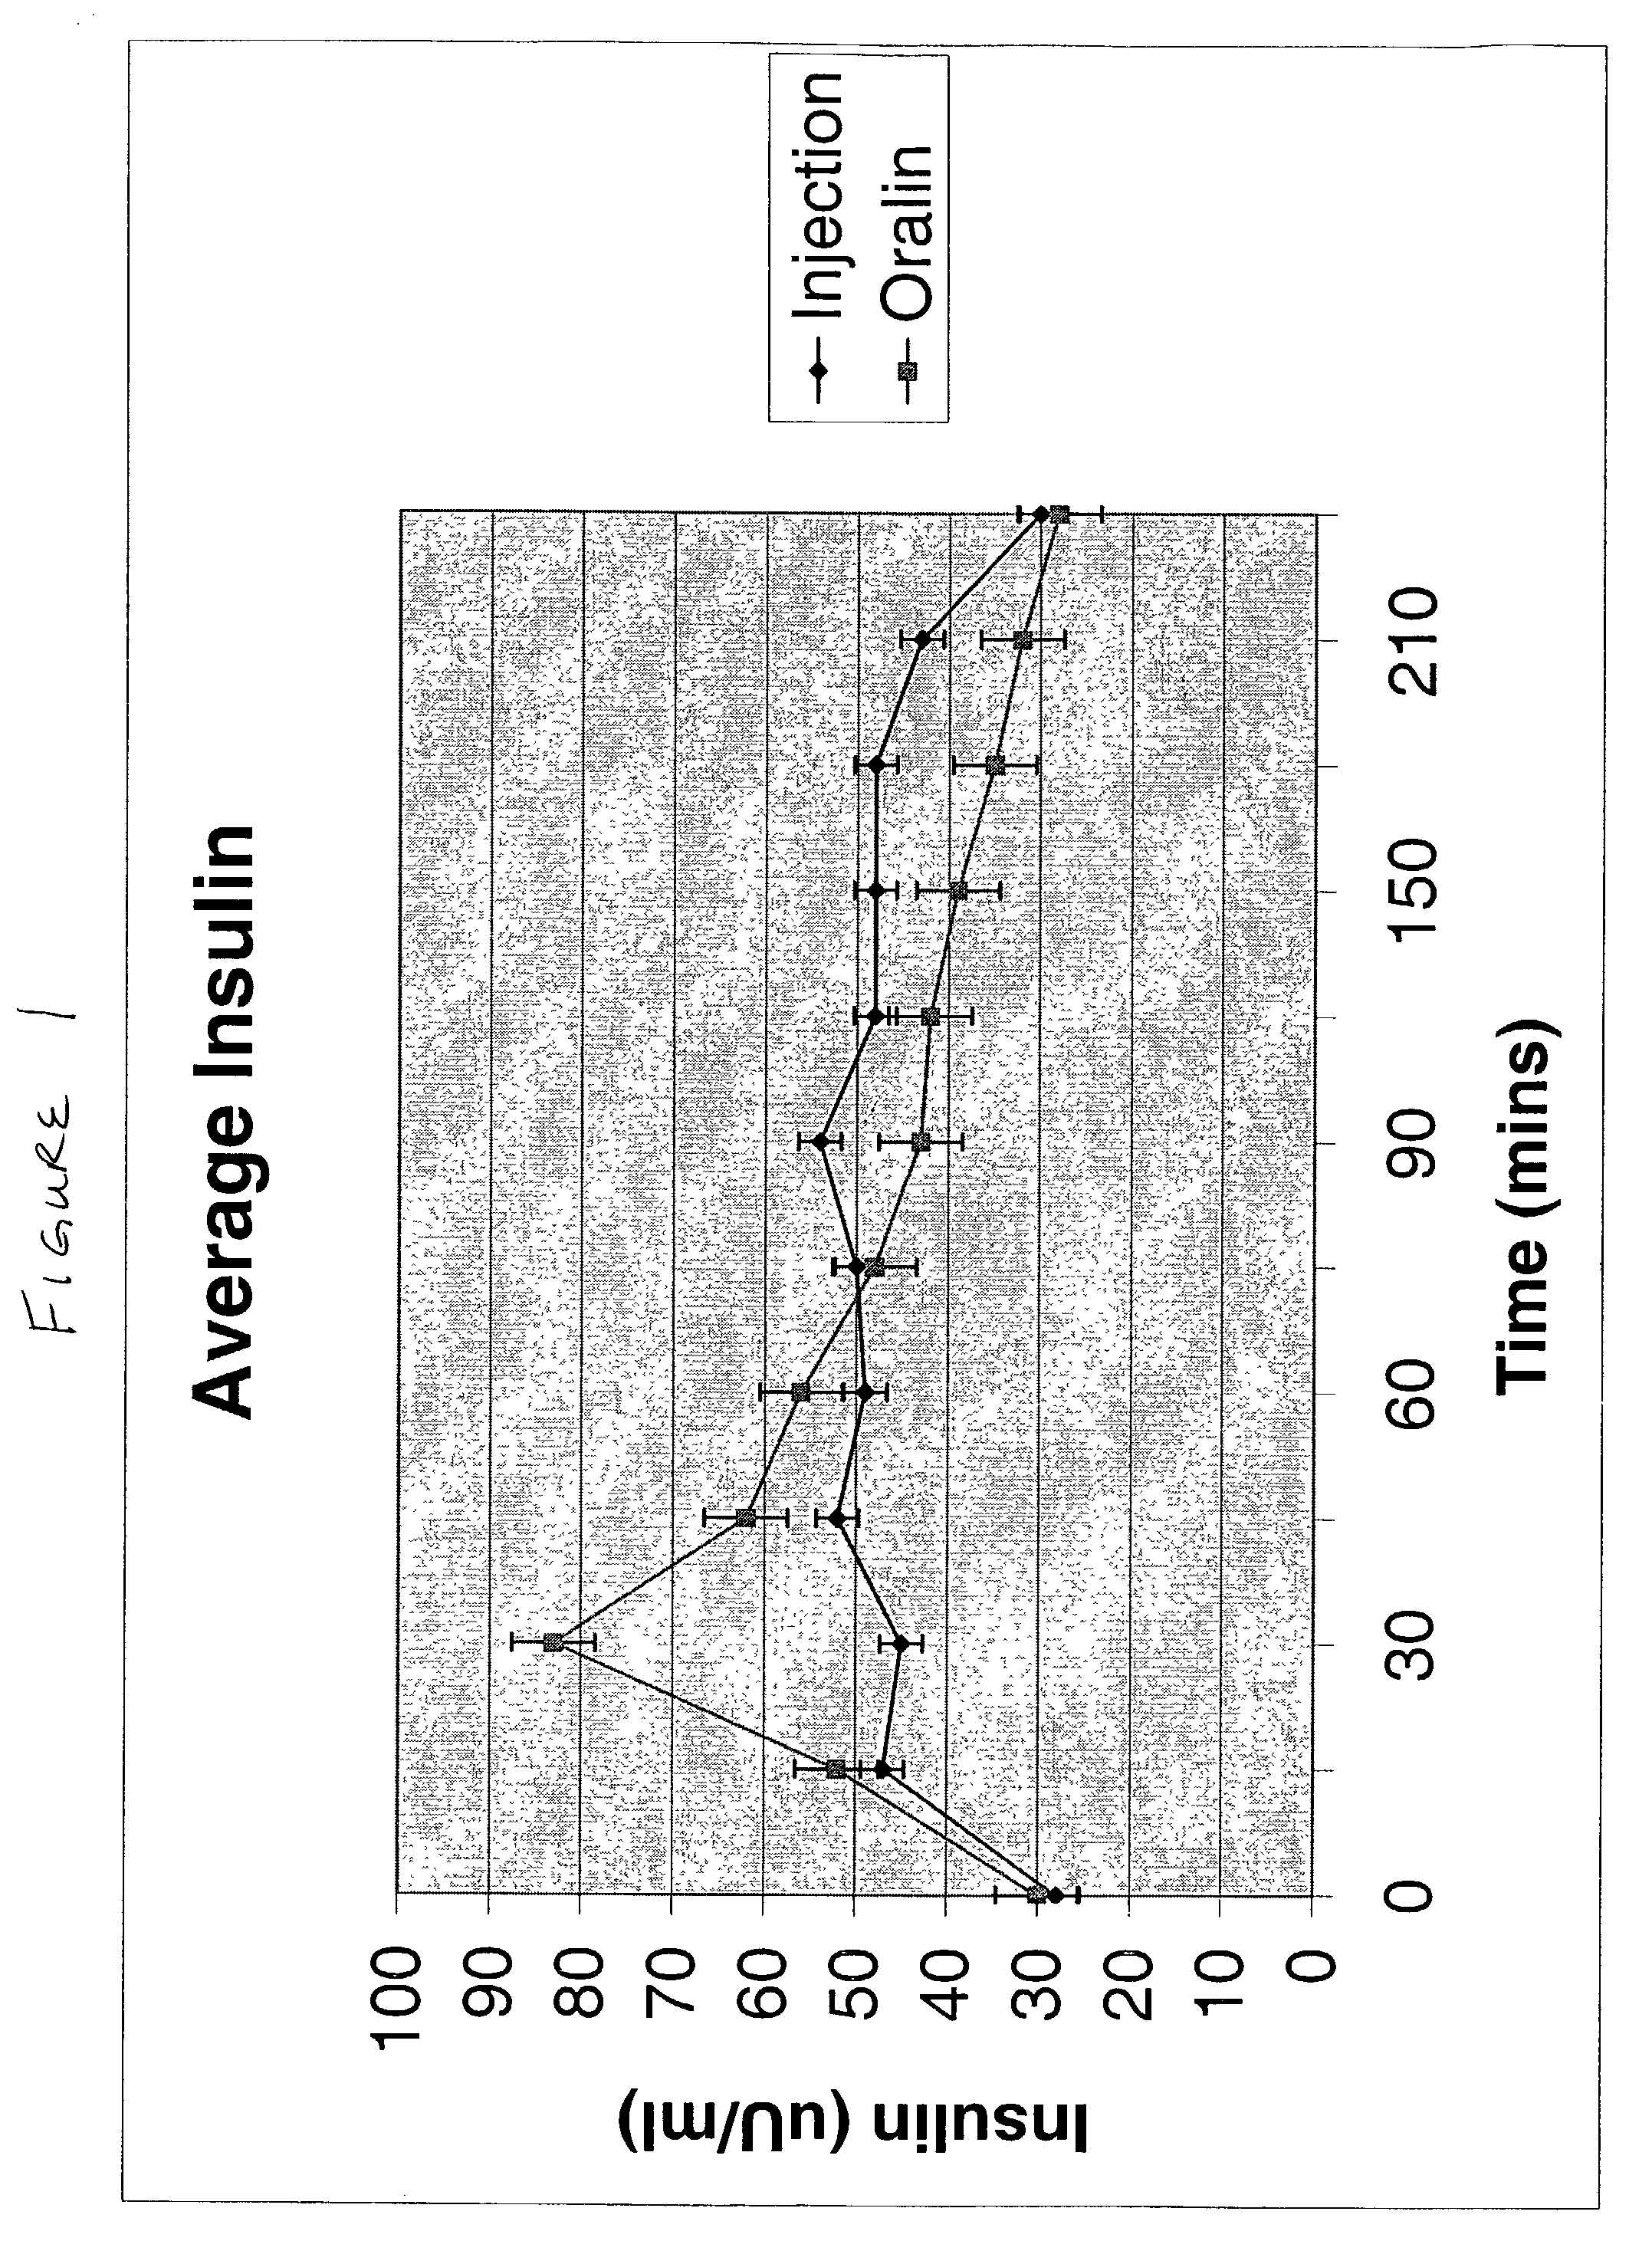 Methods of administering and enhancing absorption of pharmaceutical agents